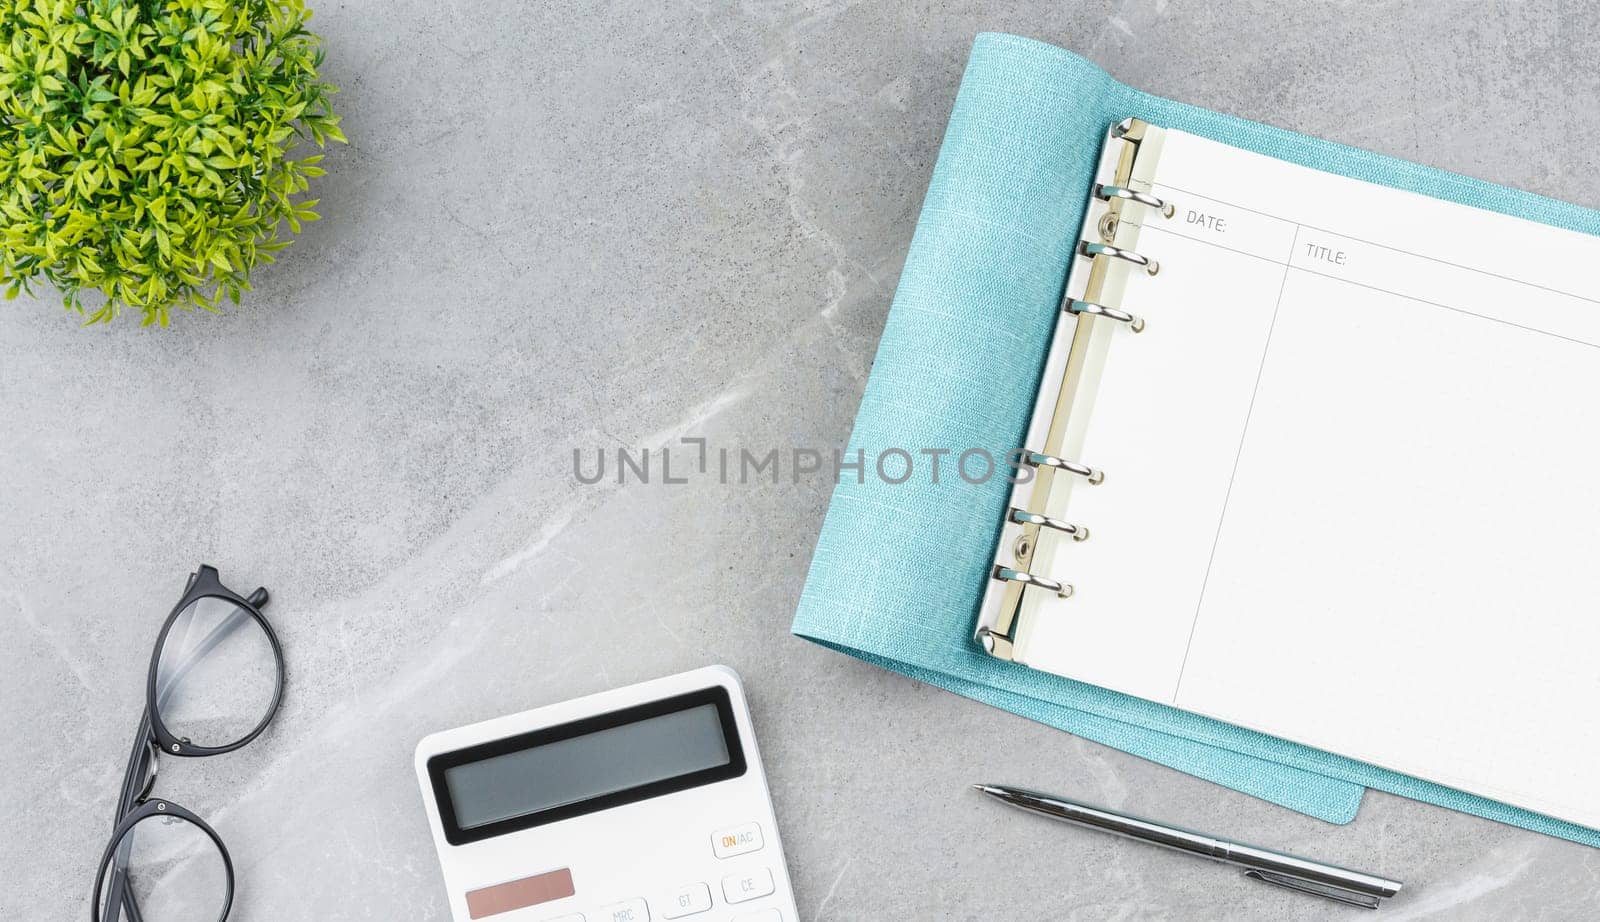 Spiral notebook in soft blue cover with metal pen, glasses, calculator and flower in a pot on gray marble background. Office desk concept. Top view.